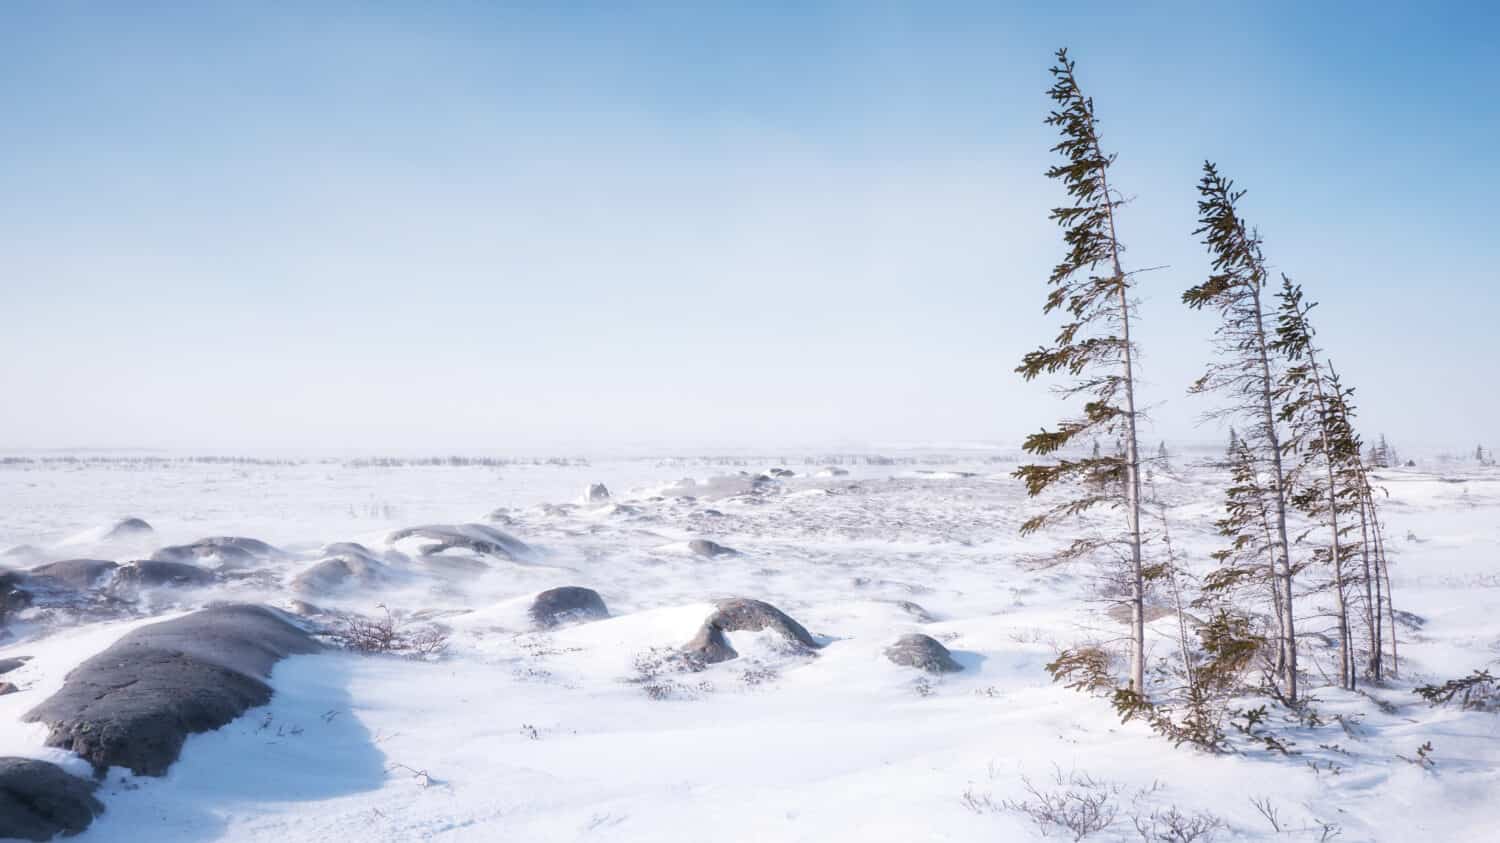 A windswept tundra landscape on a cold winter day in northern Canada, with a few thin trees struggling to survive in the barren terrain and harsh subarctic climate.